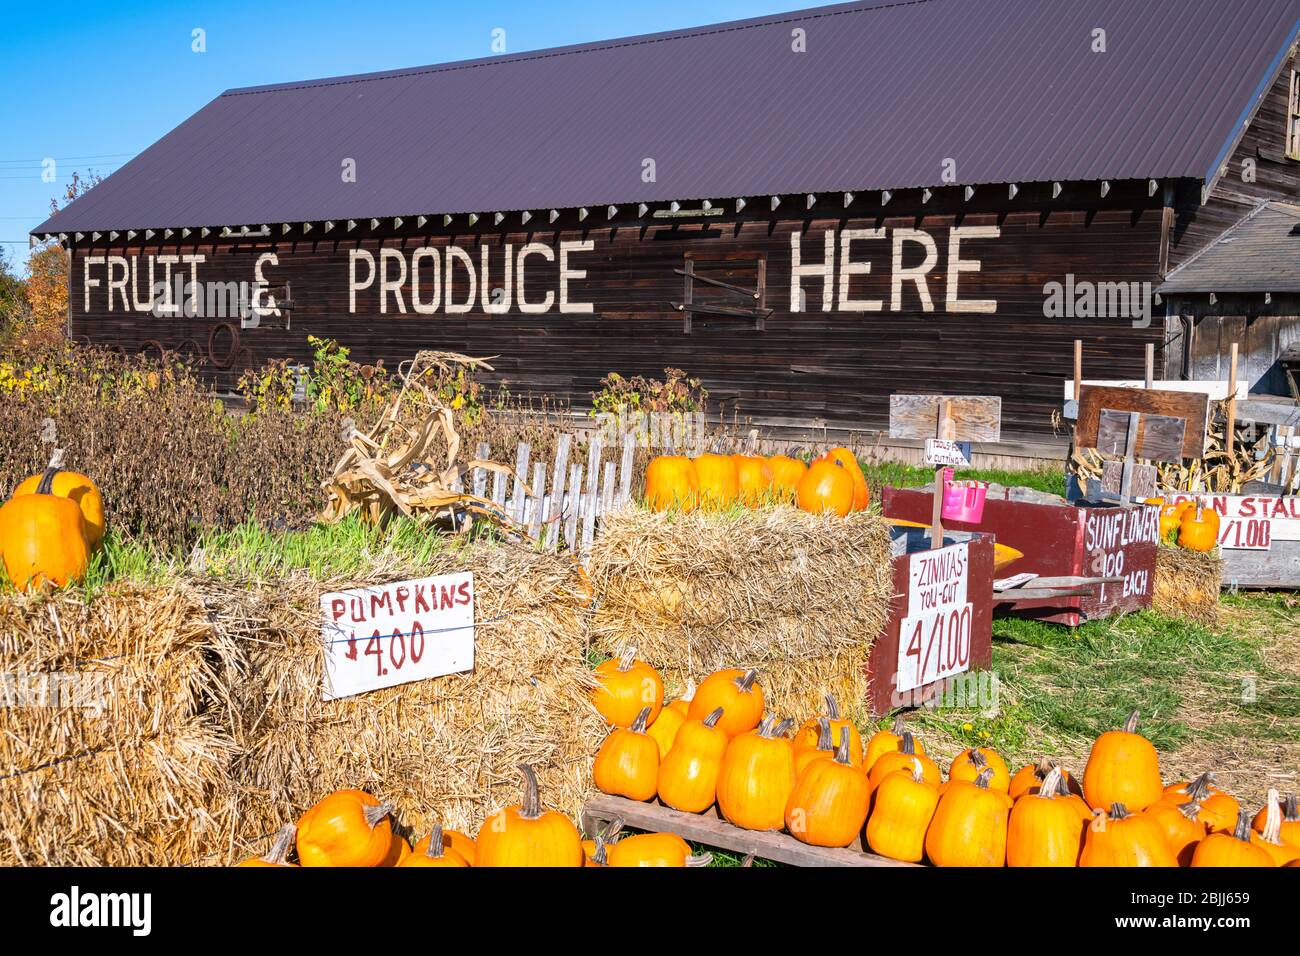 Farmer's Fruit & Produce Roadside Stand with Pumpkins Stock Photo